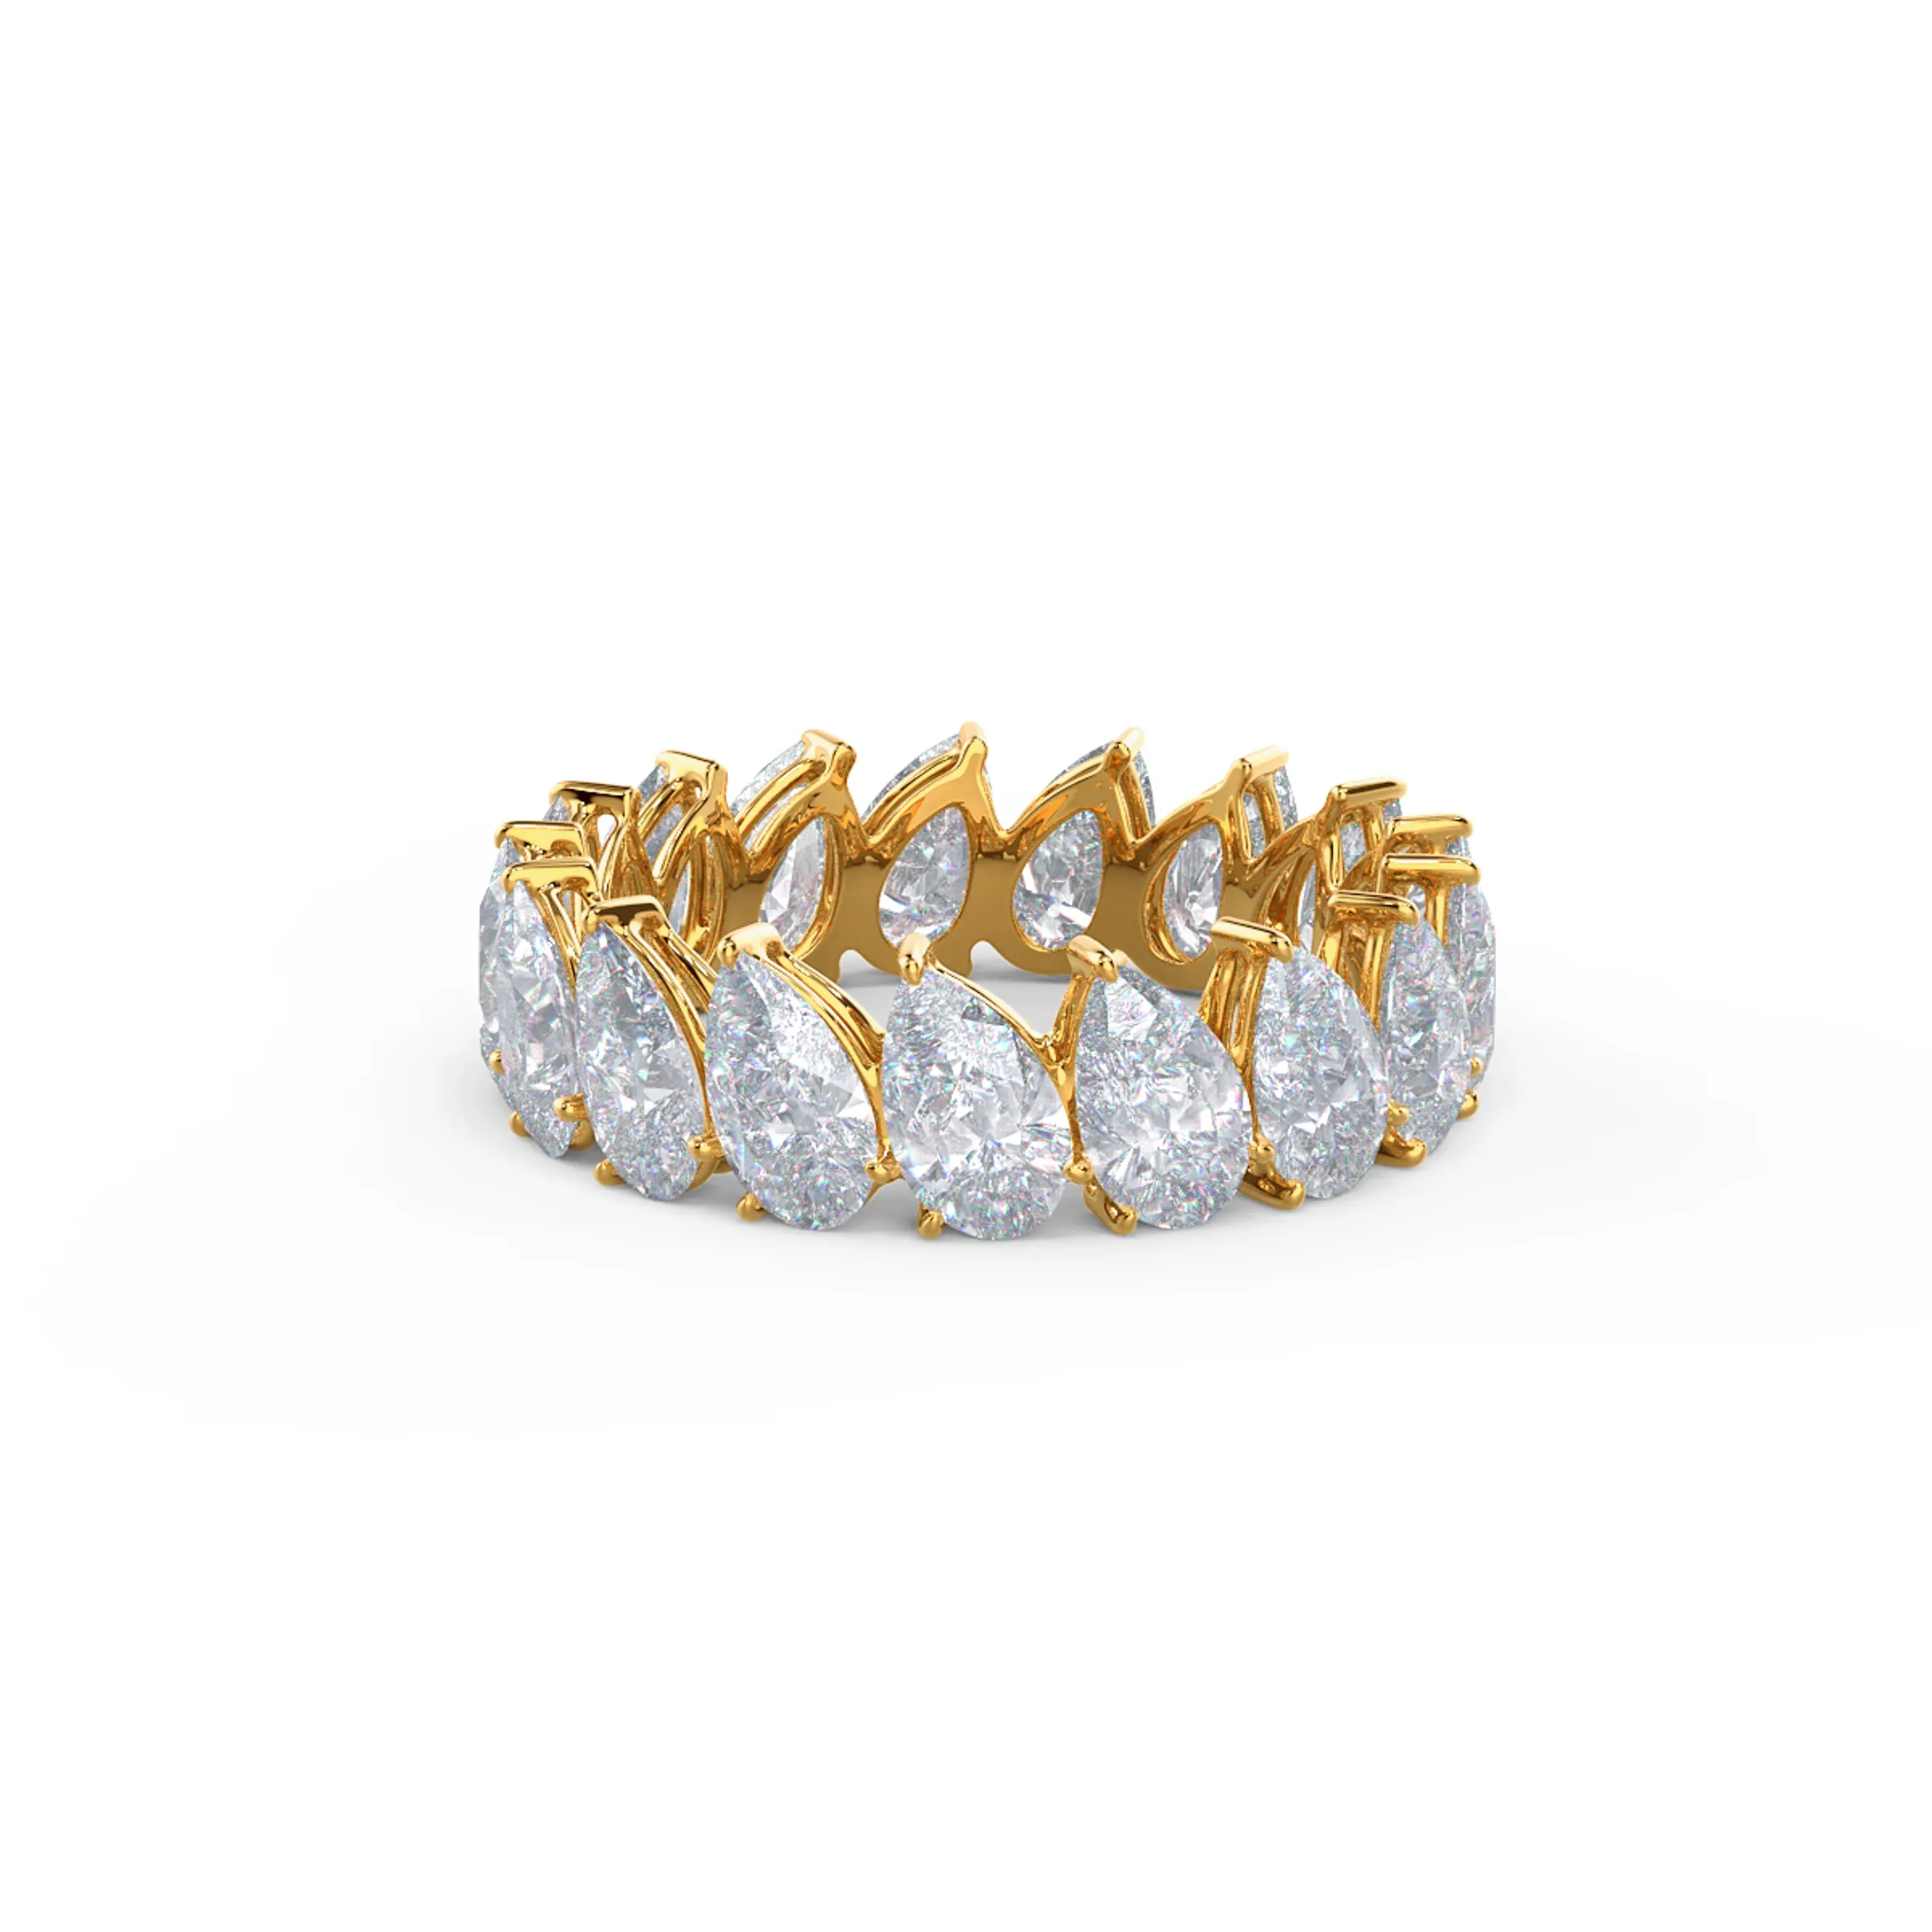 High Quality 5.0 Carat Diamonds set in 18k Yellow Gold Pear Angled Eternity Band (Main View)